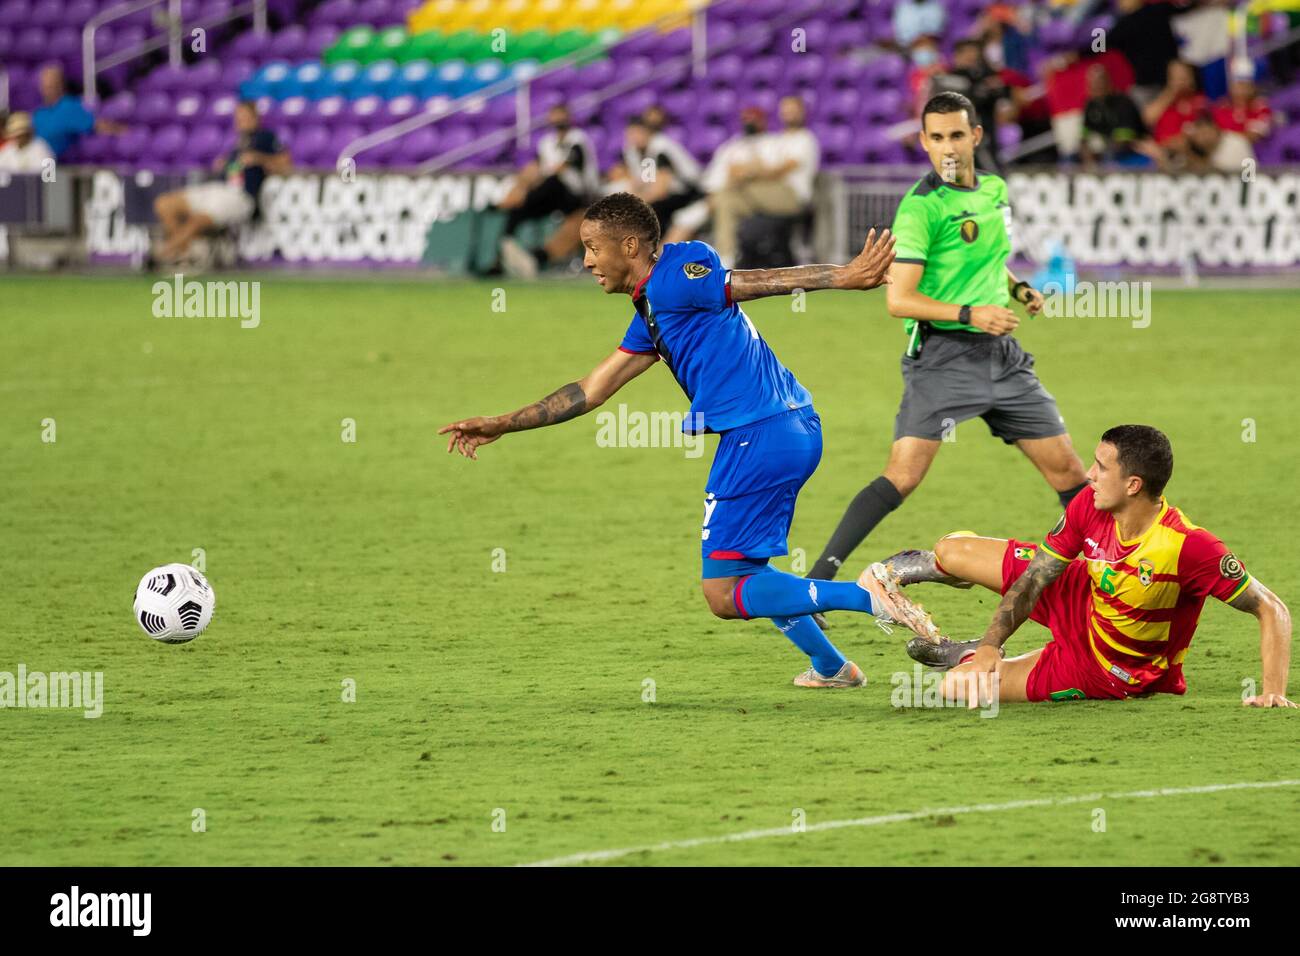 Orlando, United States. 21st July, 2021. Gabriel Torres (9 Panama) gets past Oliver Norburn (6 Grenada) during the CONCACAF Gold Cup game between Panama and Grenada at Exploria Stadium in Orlando, Florida. NO COMMERCIAL USAGE. Credit: SPP Sport Press Photo. /Alamy Live News Stock Photo